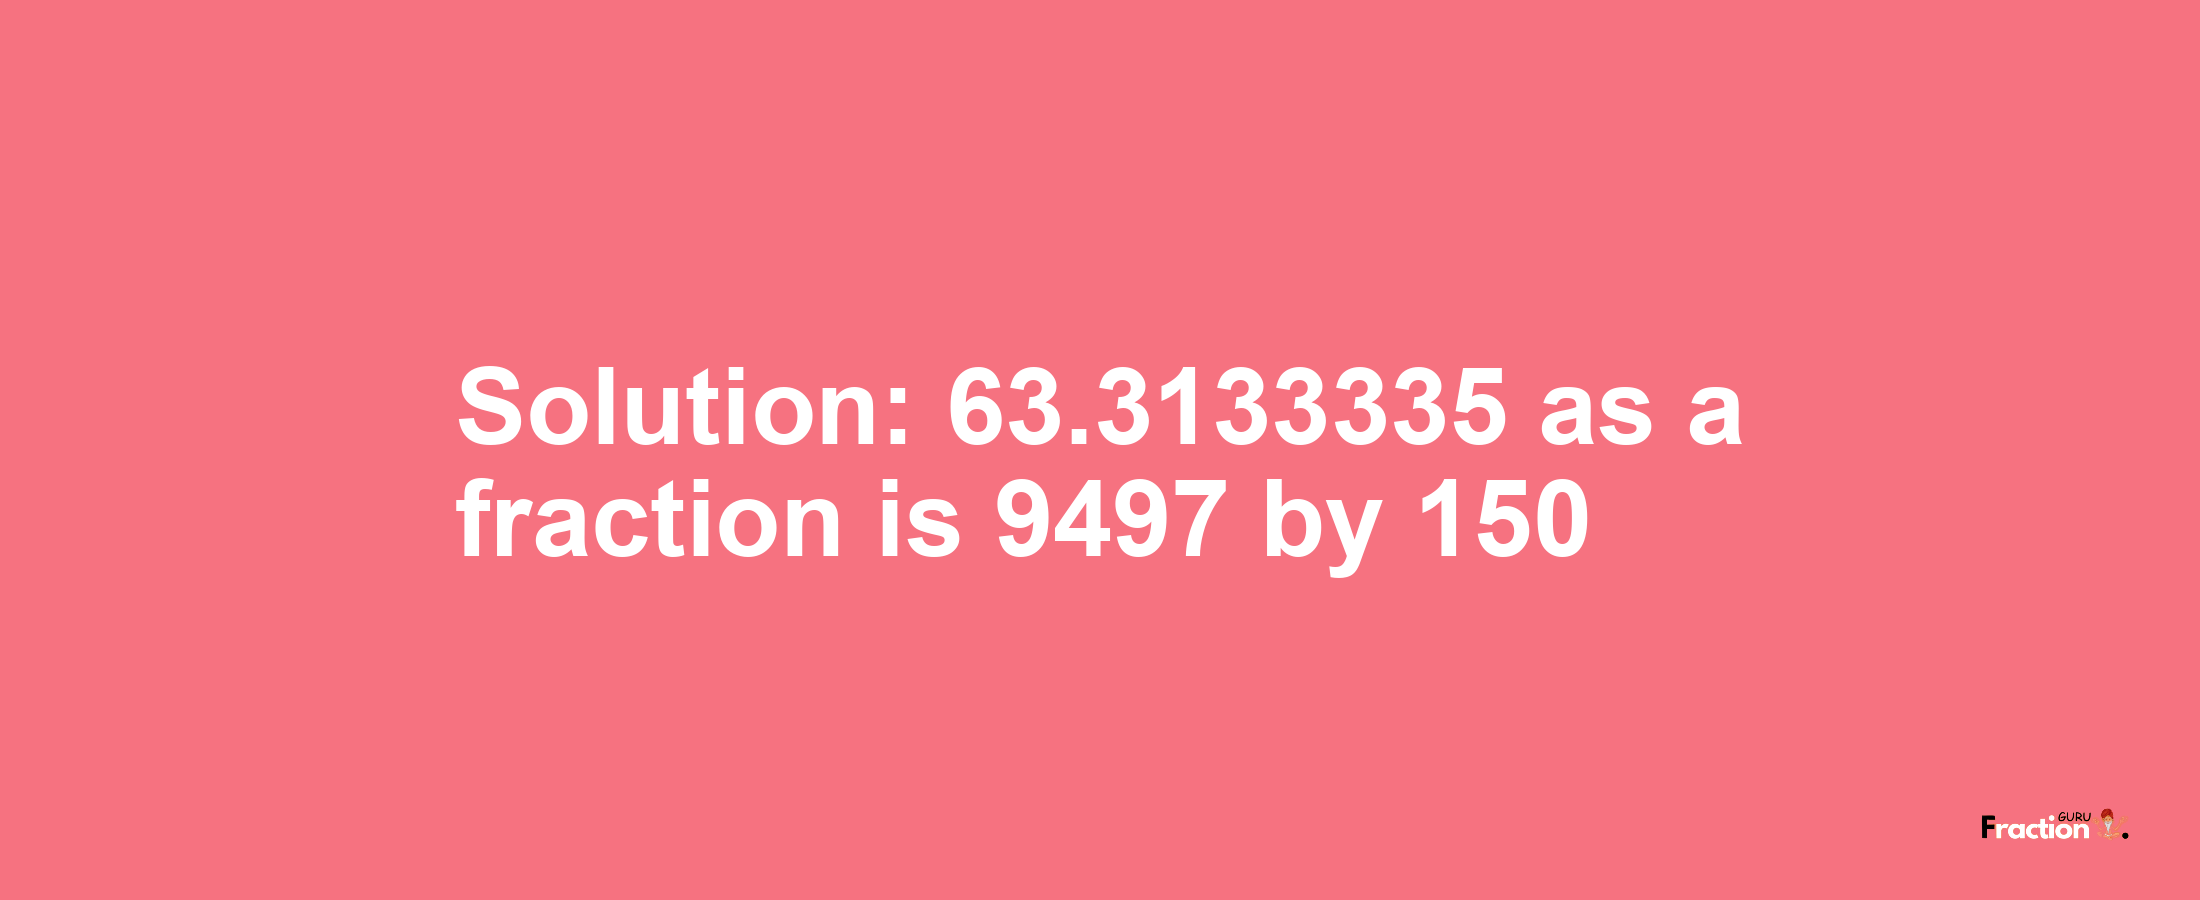 Solution:63.3133335 as a fraction is 9497/150